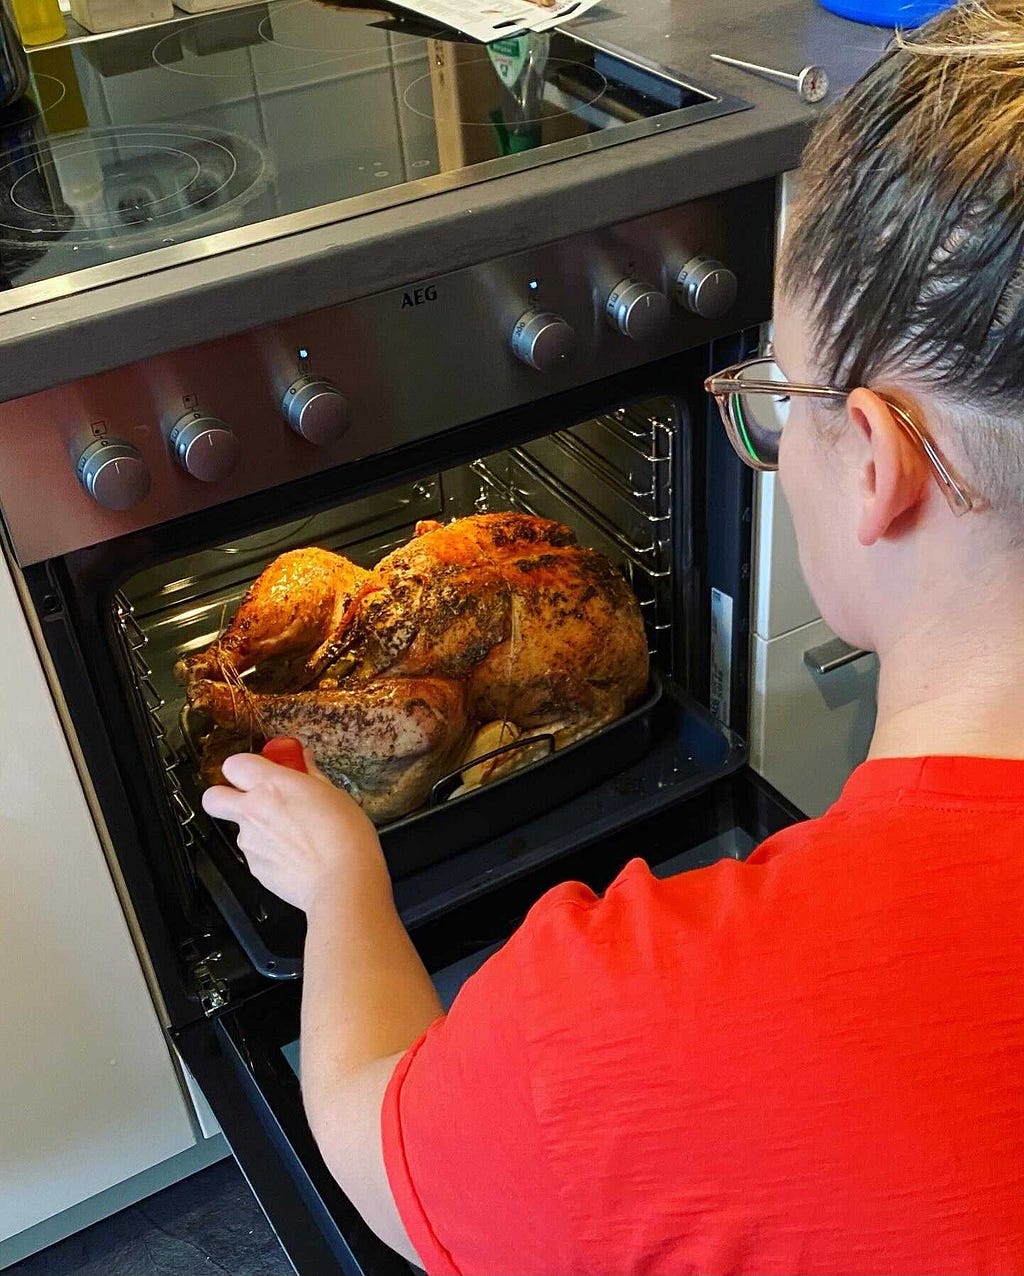 Lauren, basting a giant turkey in preparation for Thanksgiving in Germany